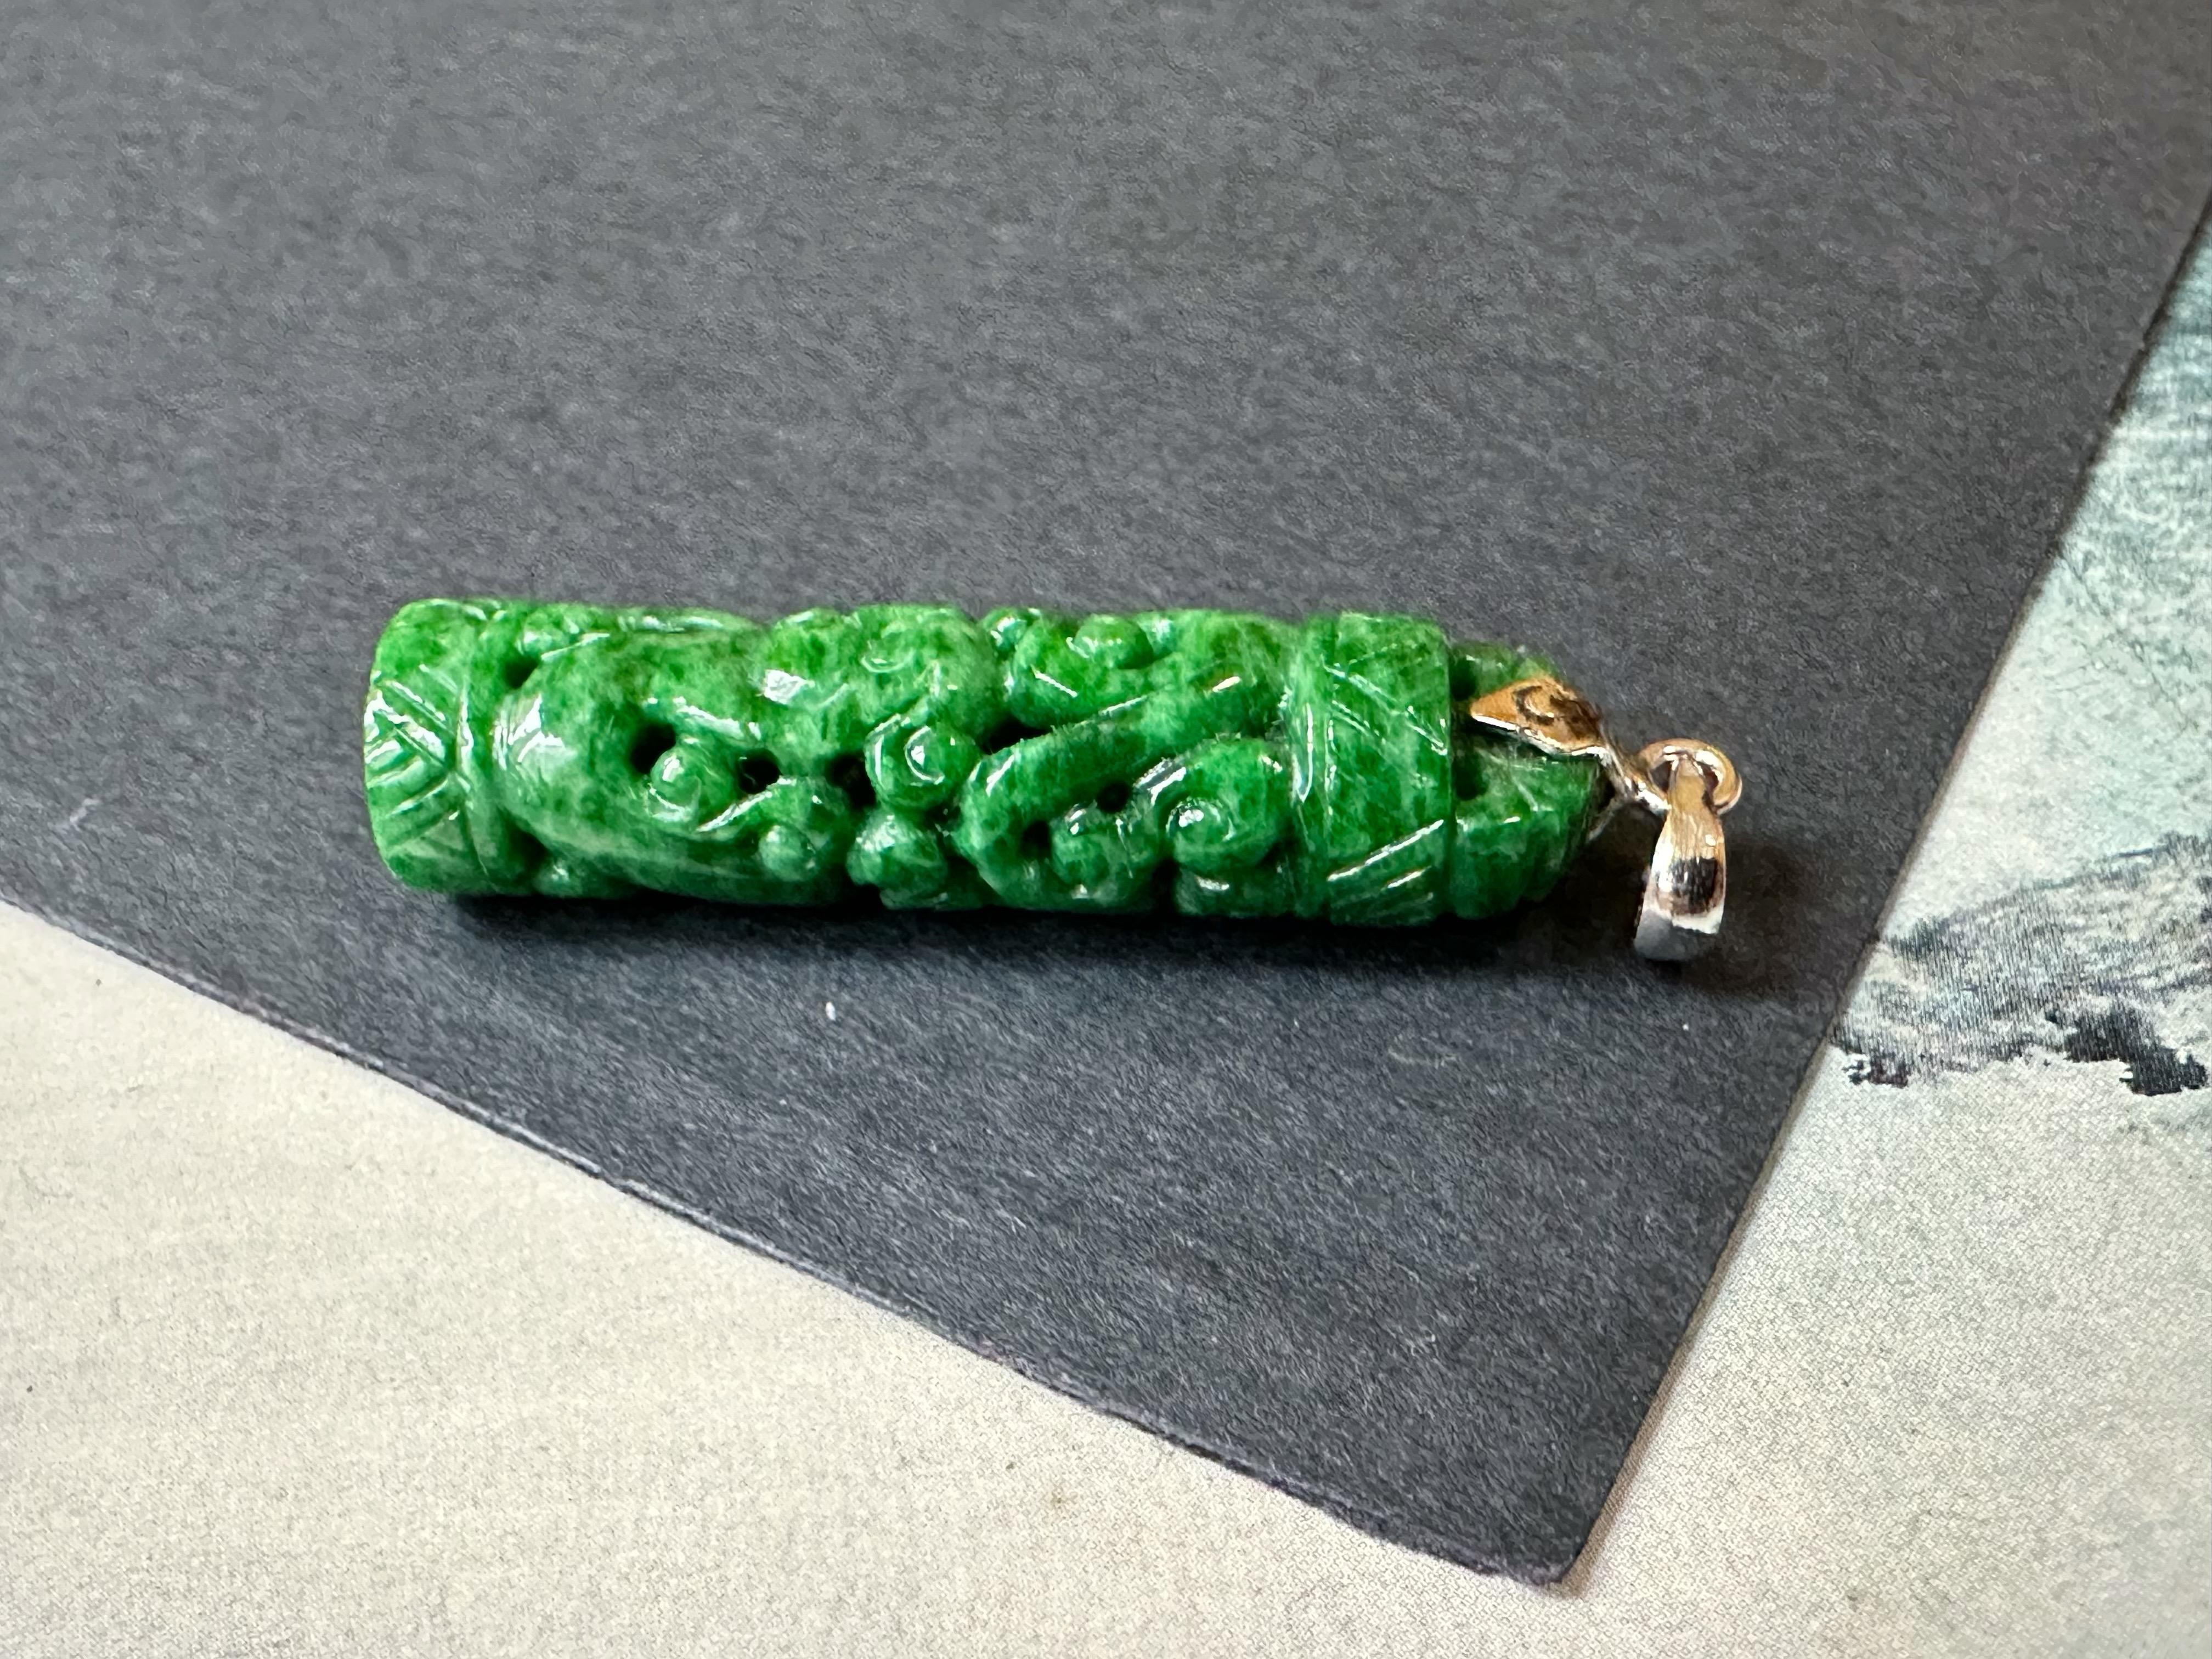 This jade pendant is 100% natural, untreated, and undyed Type-A Myanmar jadeite jade. It is pierce-carved into a cylindrical shape with dragon and phoenix patterns. The vivid green color Mother Nature gifted makes this pendant unique and attractive.